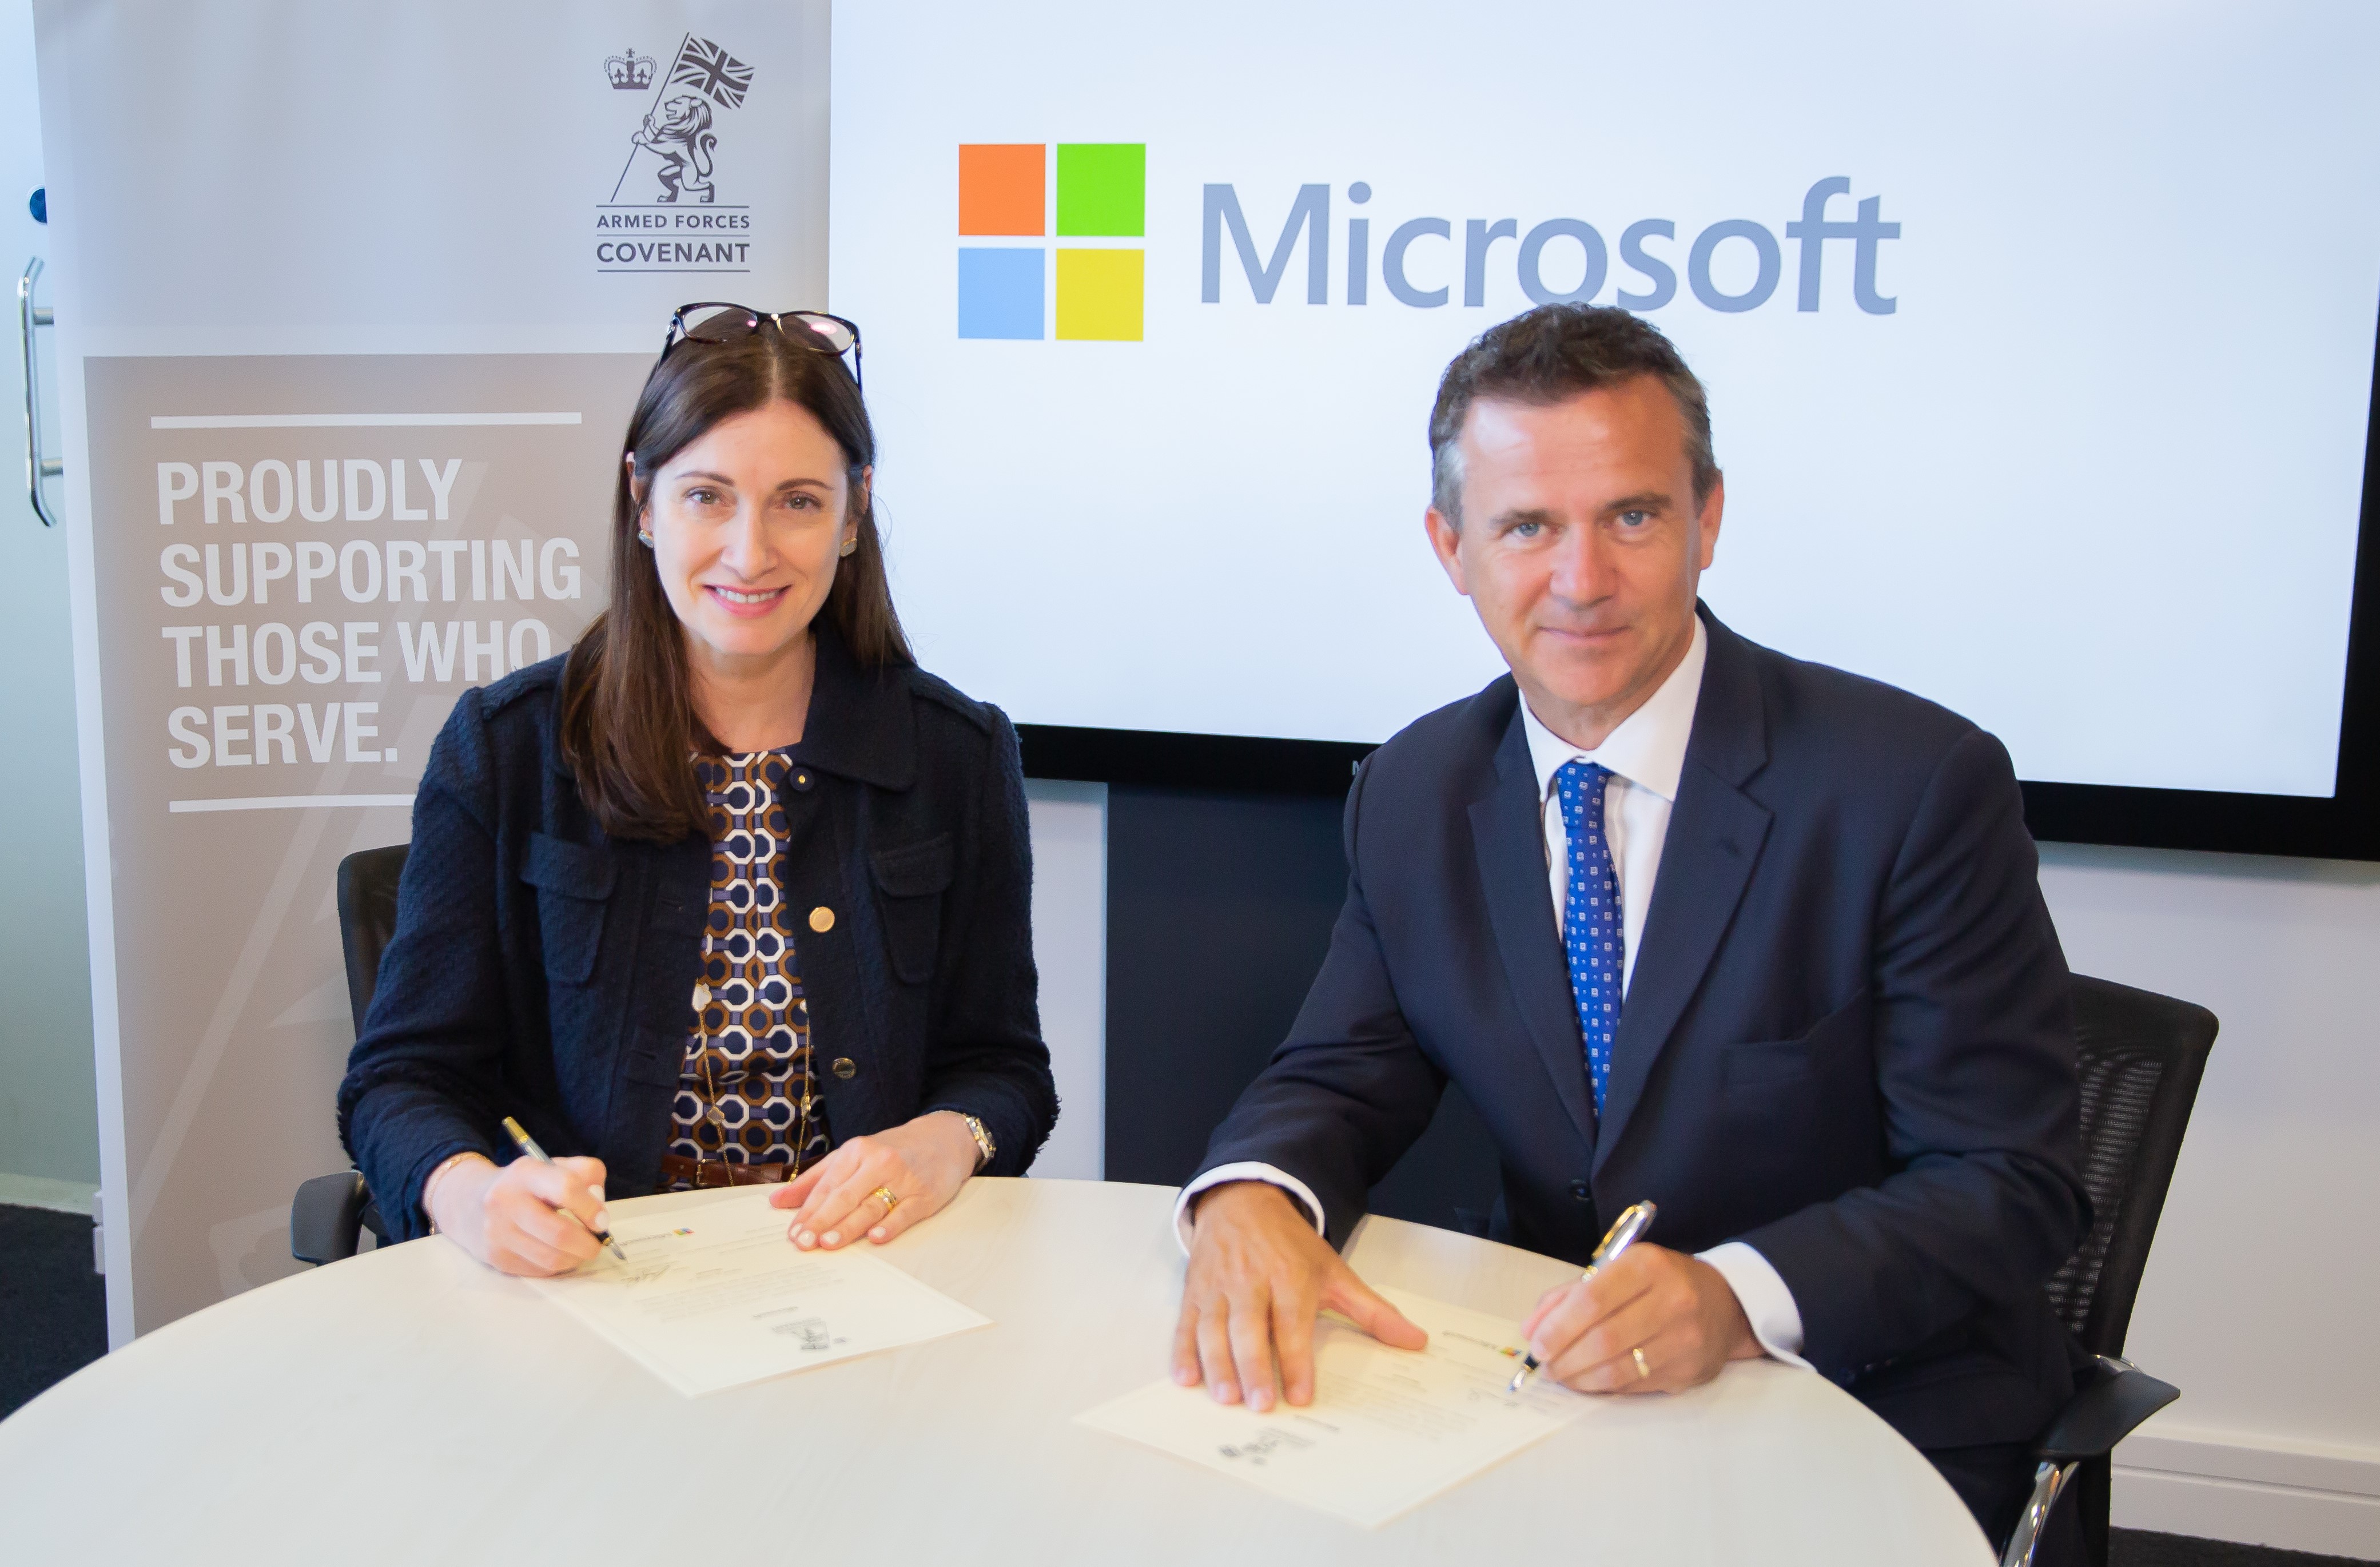 Cindy Rose, Chief Executive of Microsoft UK, and Mark Lancaster MP, the Minister of State for the Armed Forces, sign the Armed Forces Covenant